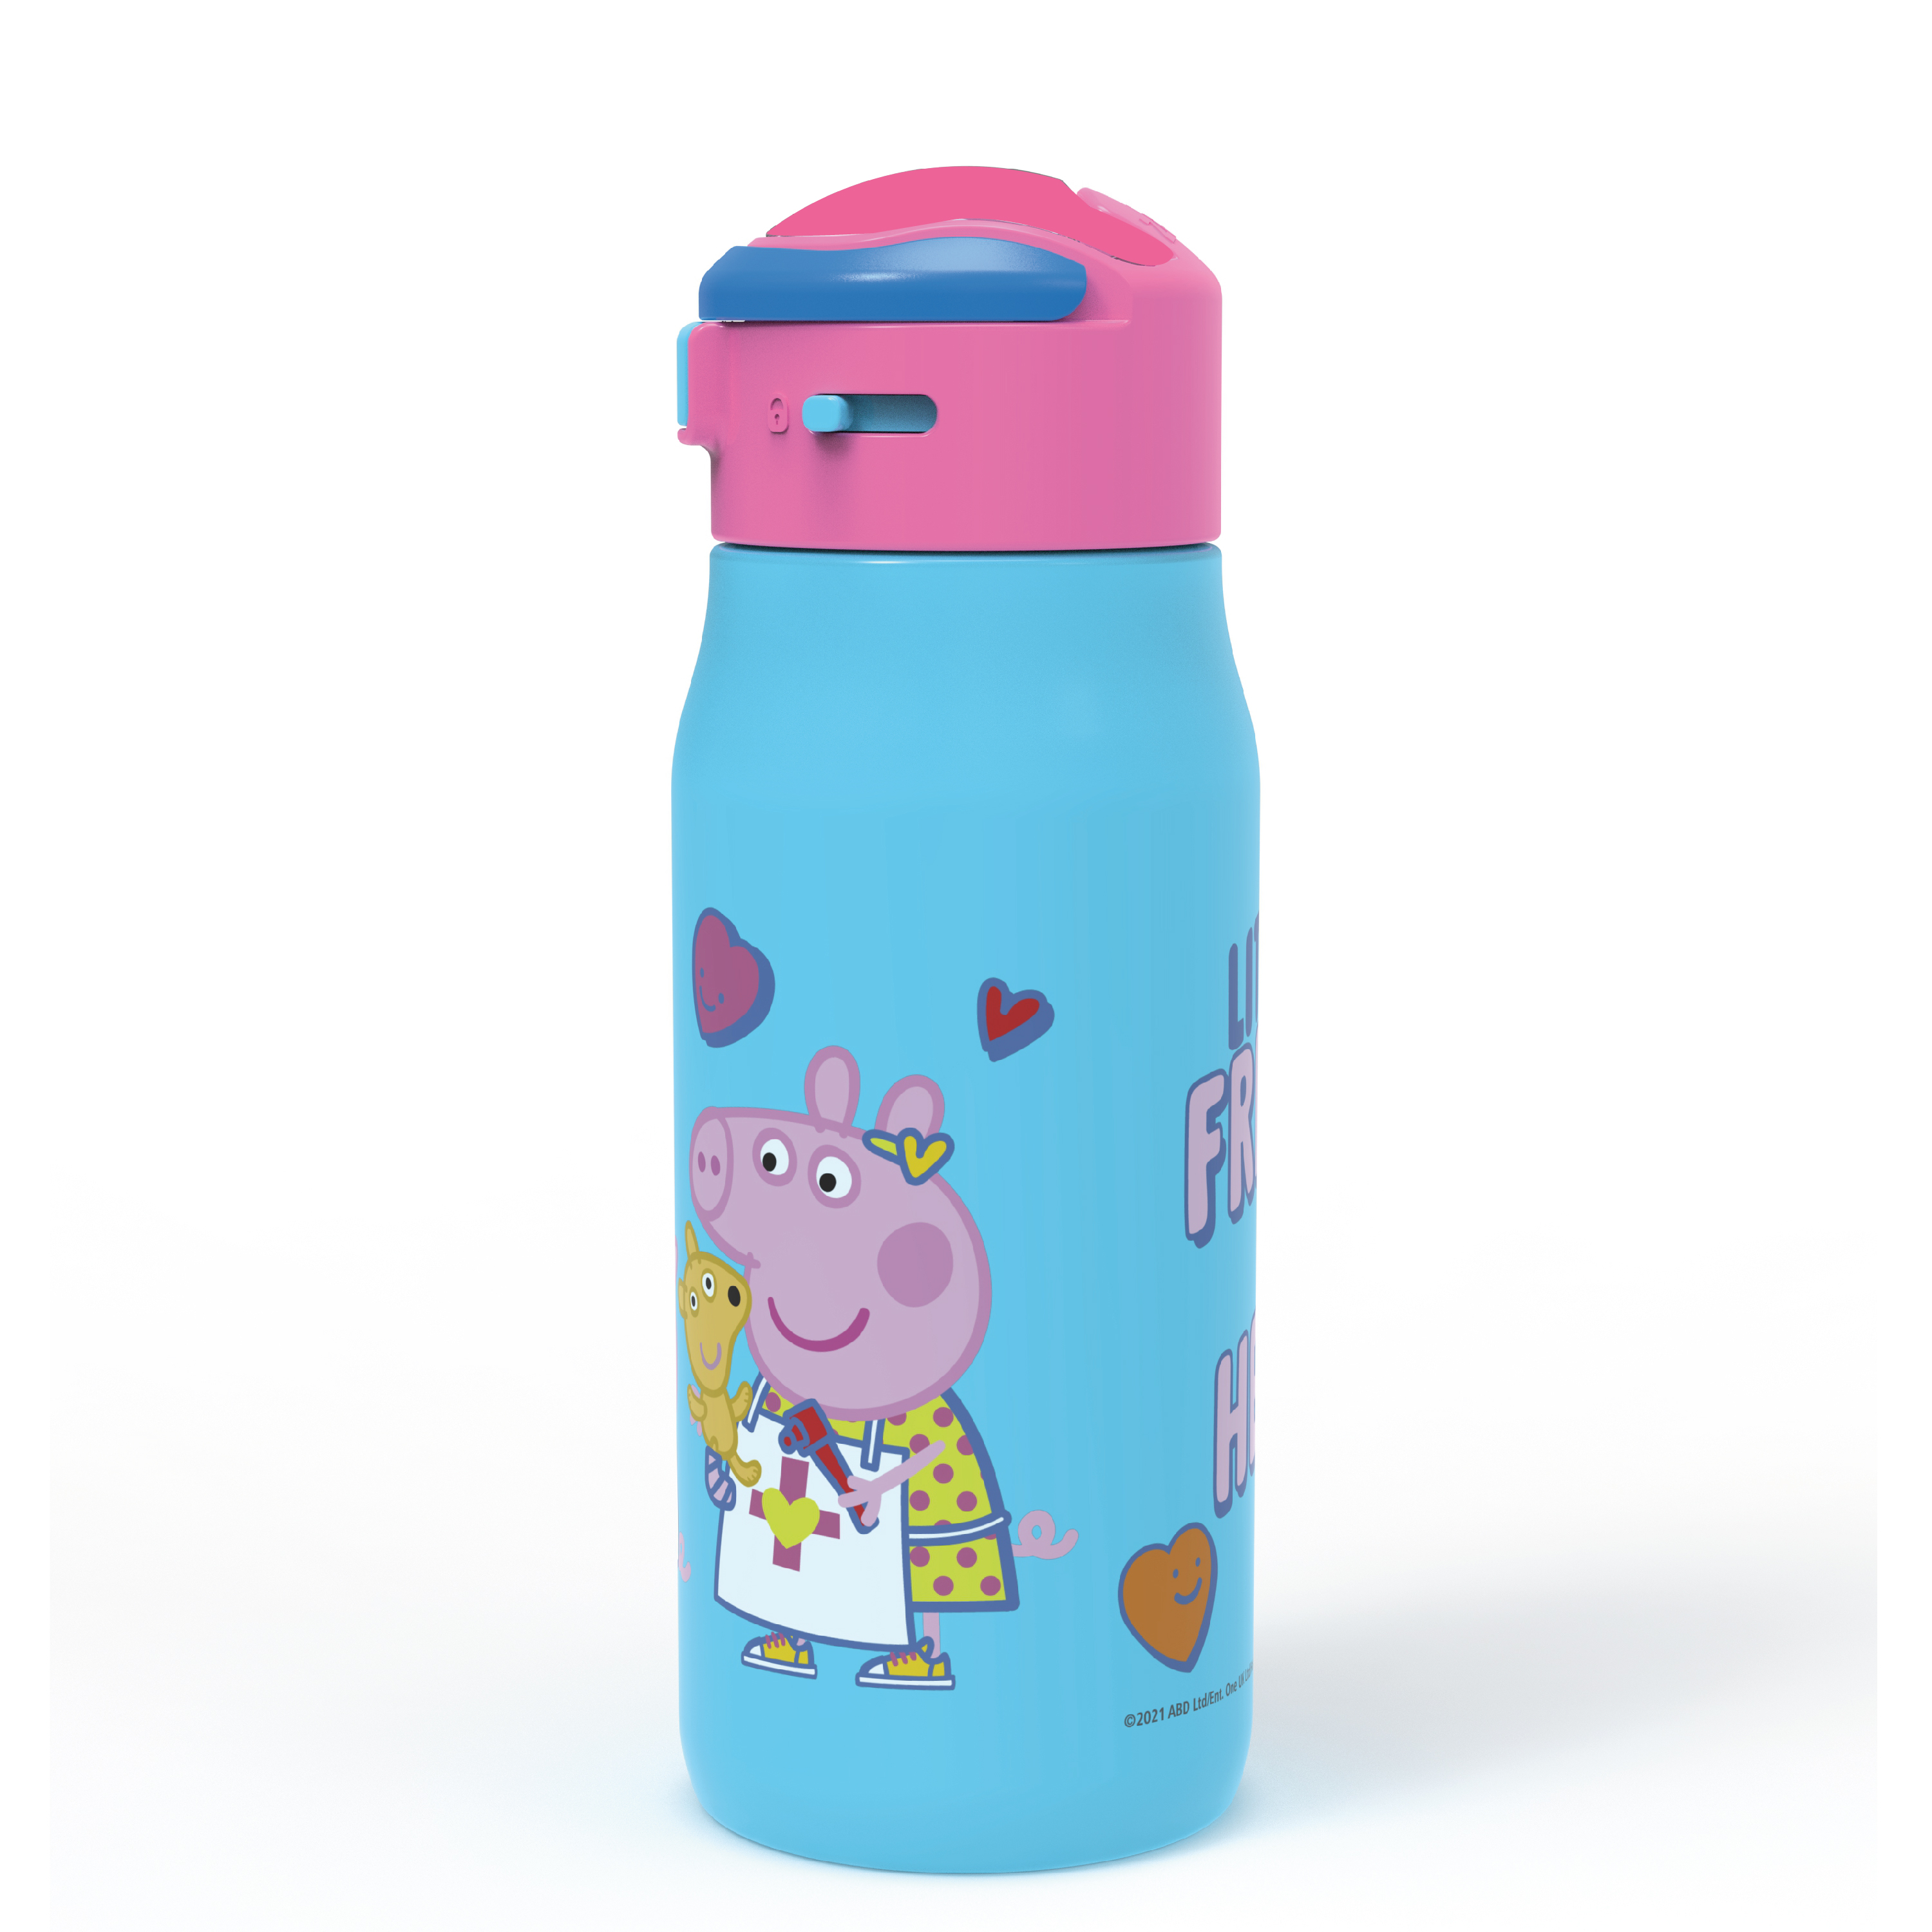 Peppa Pig 13.5 ounce Mesa Double Wall Insulated Stainless Steel Water Bottle, Peppa and Friends slideshow image 2